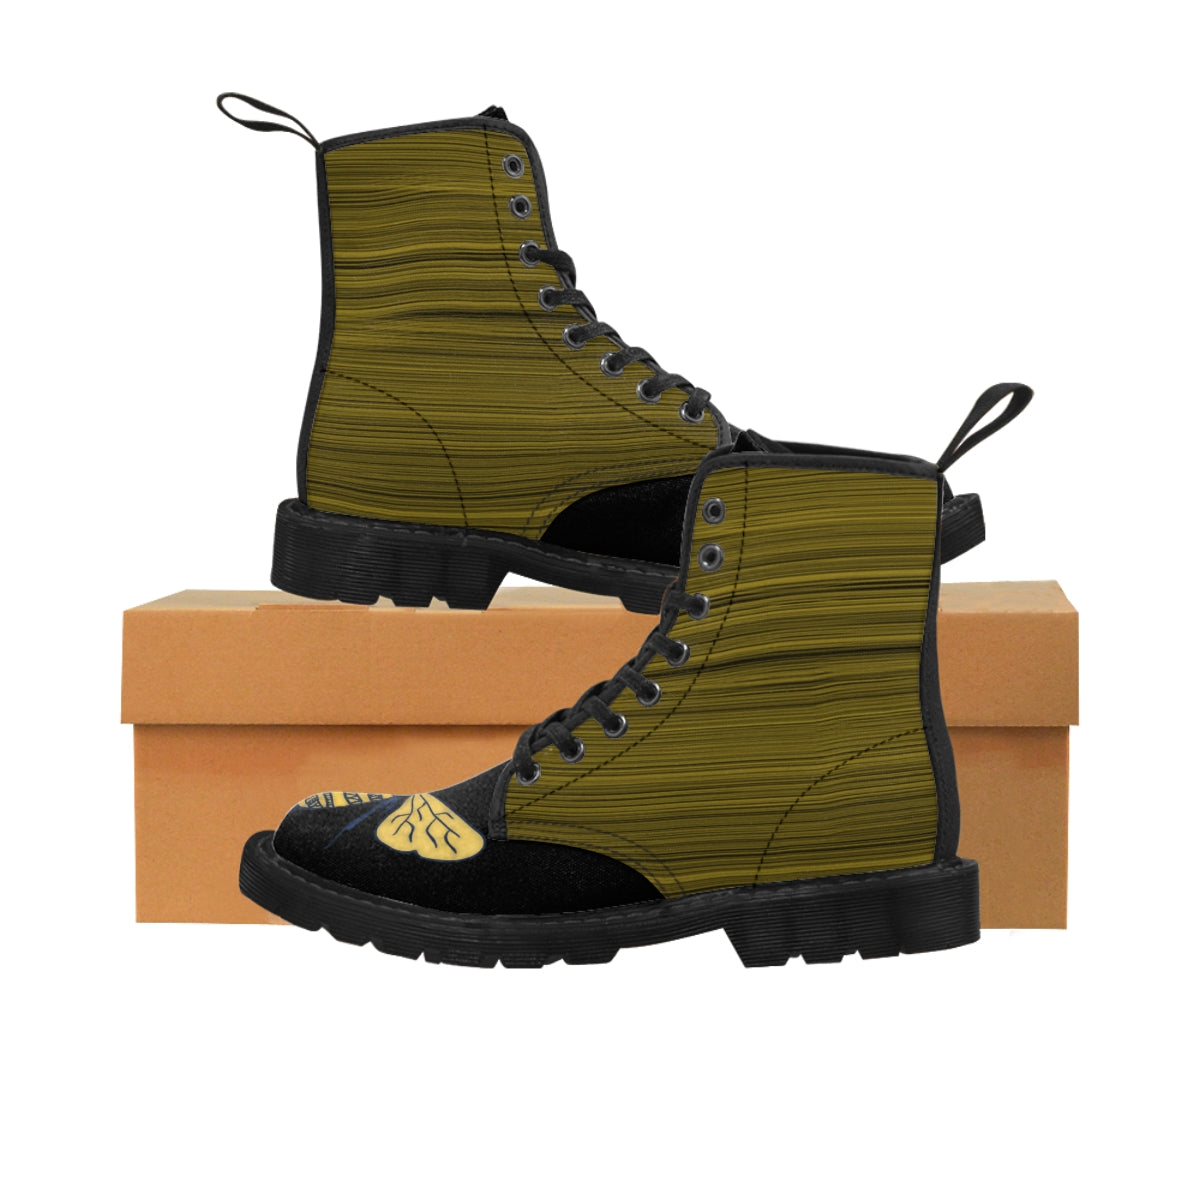 Deep Yellow Doodle Bee Painted Women's Canvas Boots Shoes Bee boots original art boots Shoes unique womens boots vegan boots vegan combat boots womens boots womens fashion boots